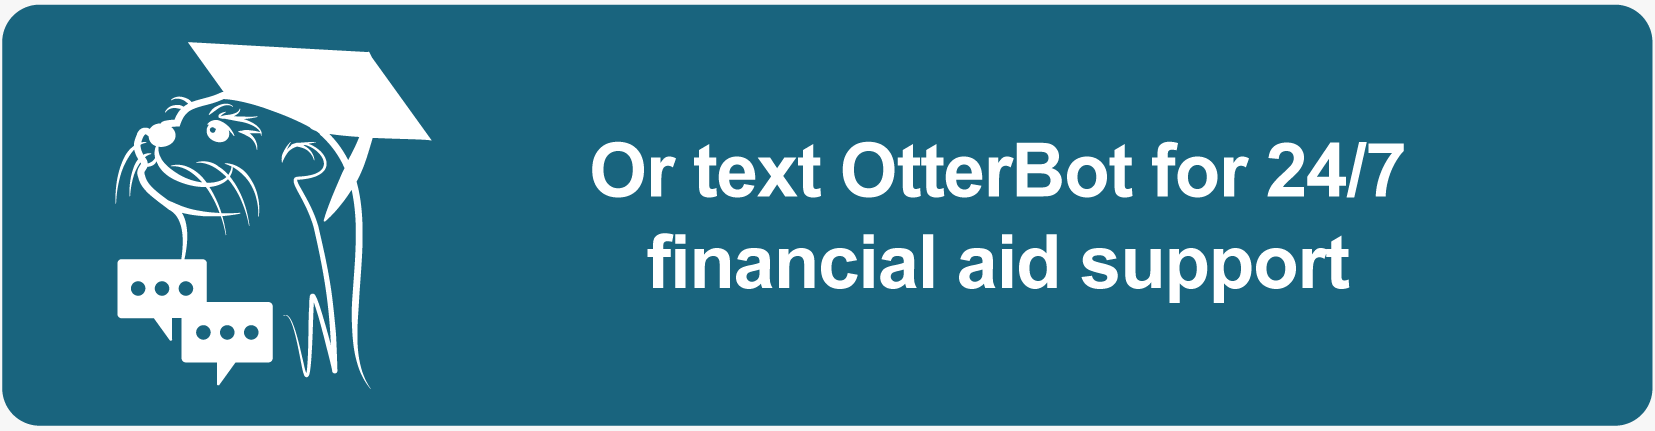 text OtterBot for 24/7 financial aid support